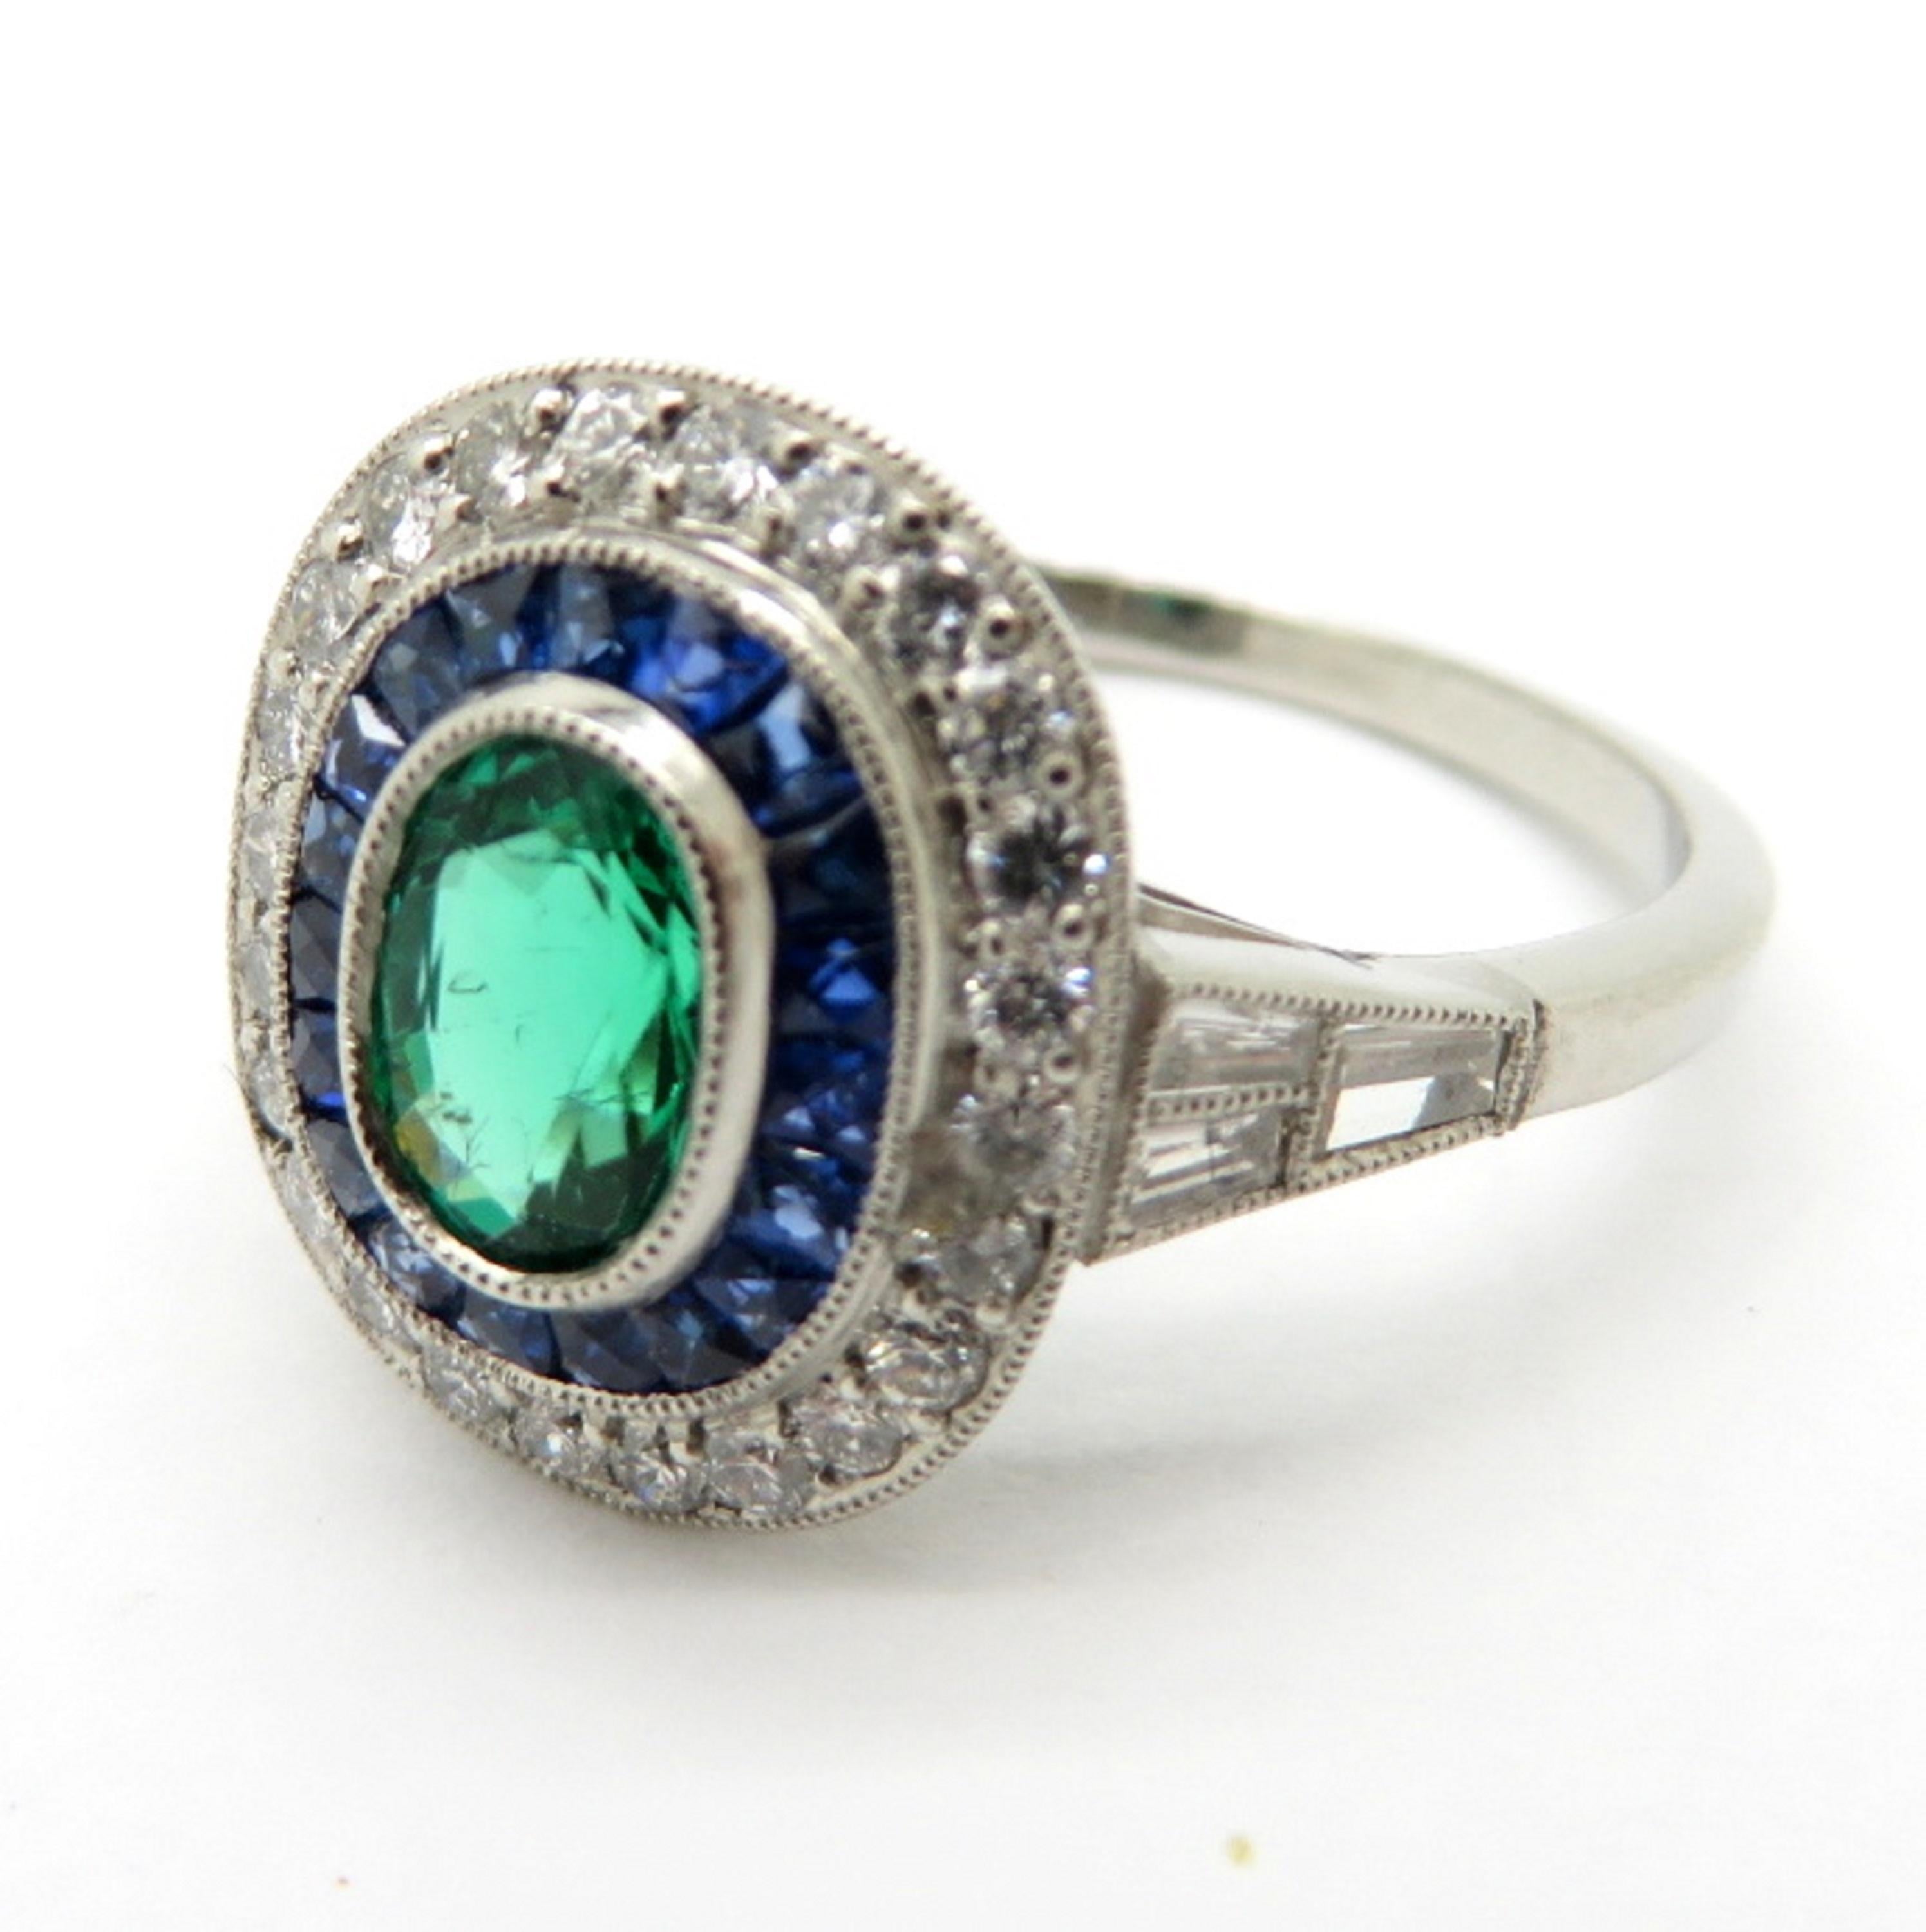 Centering 1 Oval fine quality natural Emerald, milgrain bezel set, weighing approximately 0.62 carats.
Featuring 24 Round Brilliant Cut diamonds, weighing 0.28 carats, having H-I Color Grade and SI1 Clarity Grade.  Accented by 6 Tapered Baguette